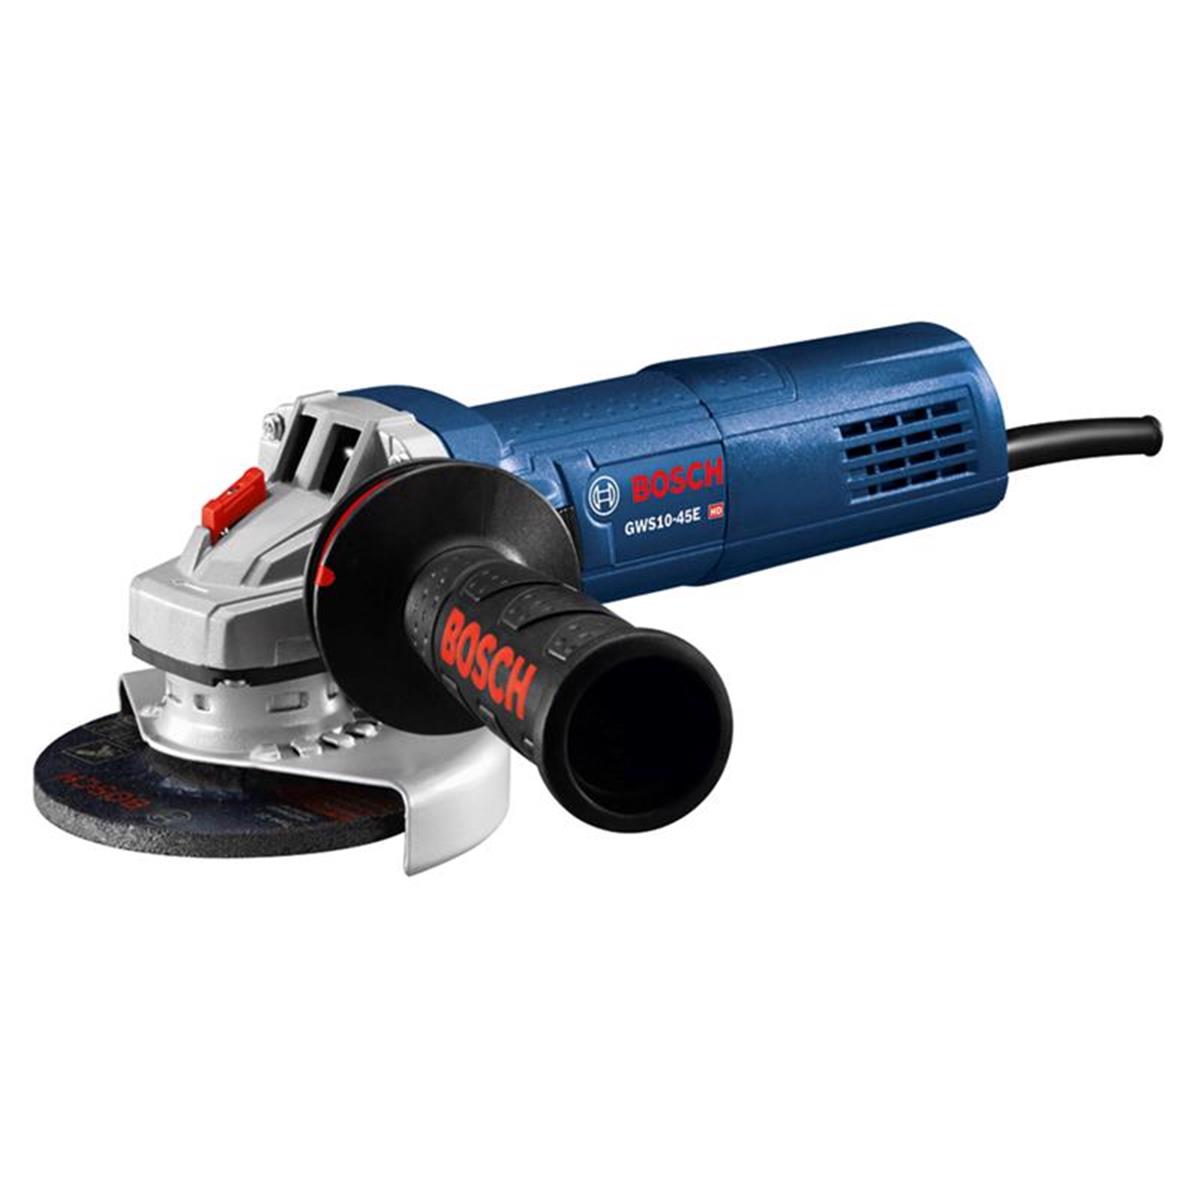 Picture of Bosch 2026494 4.5 in. 120V 10 amps Corded Angle Grinder